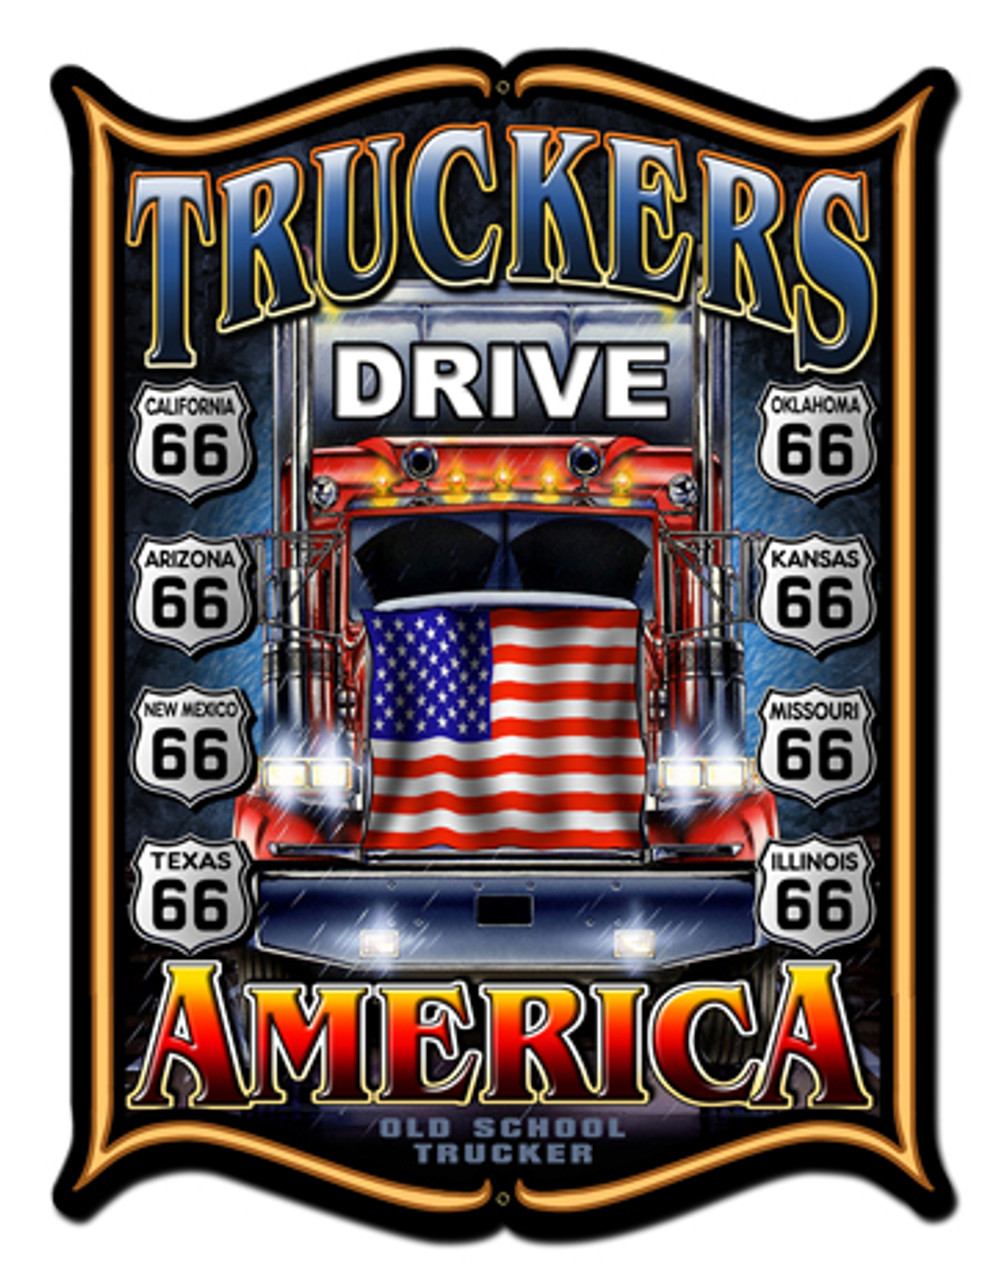 Truckers Drive America Metal Sign 24 x 33 Inches